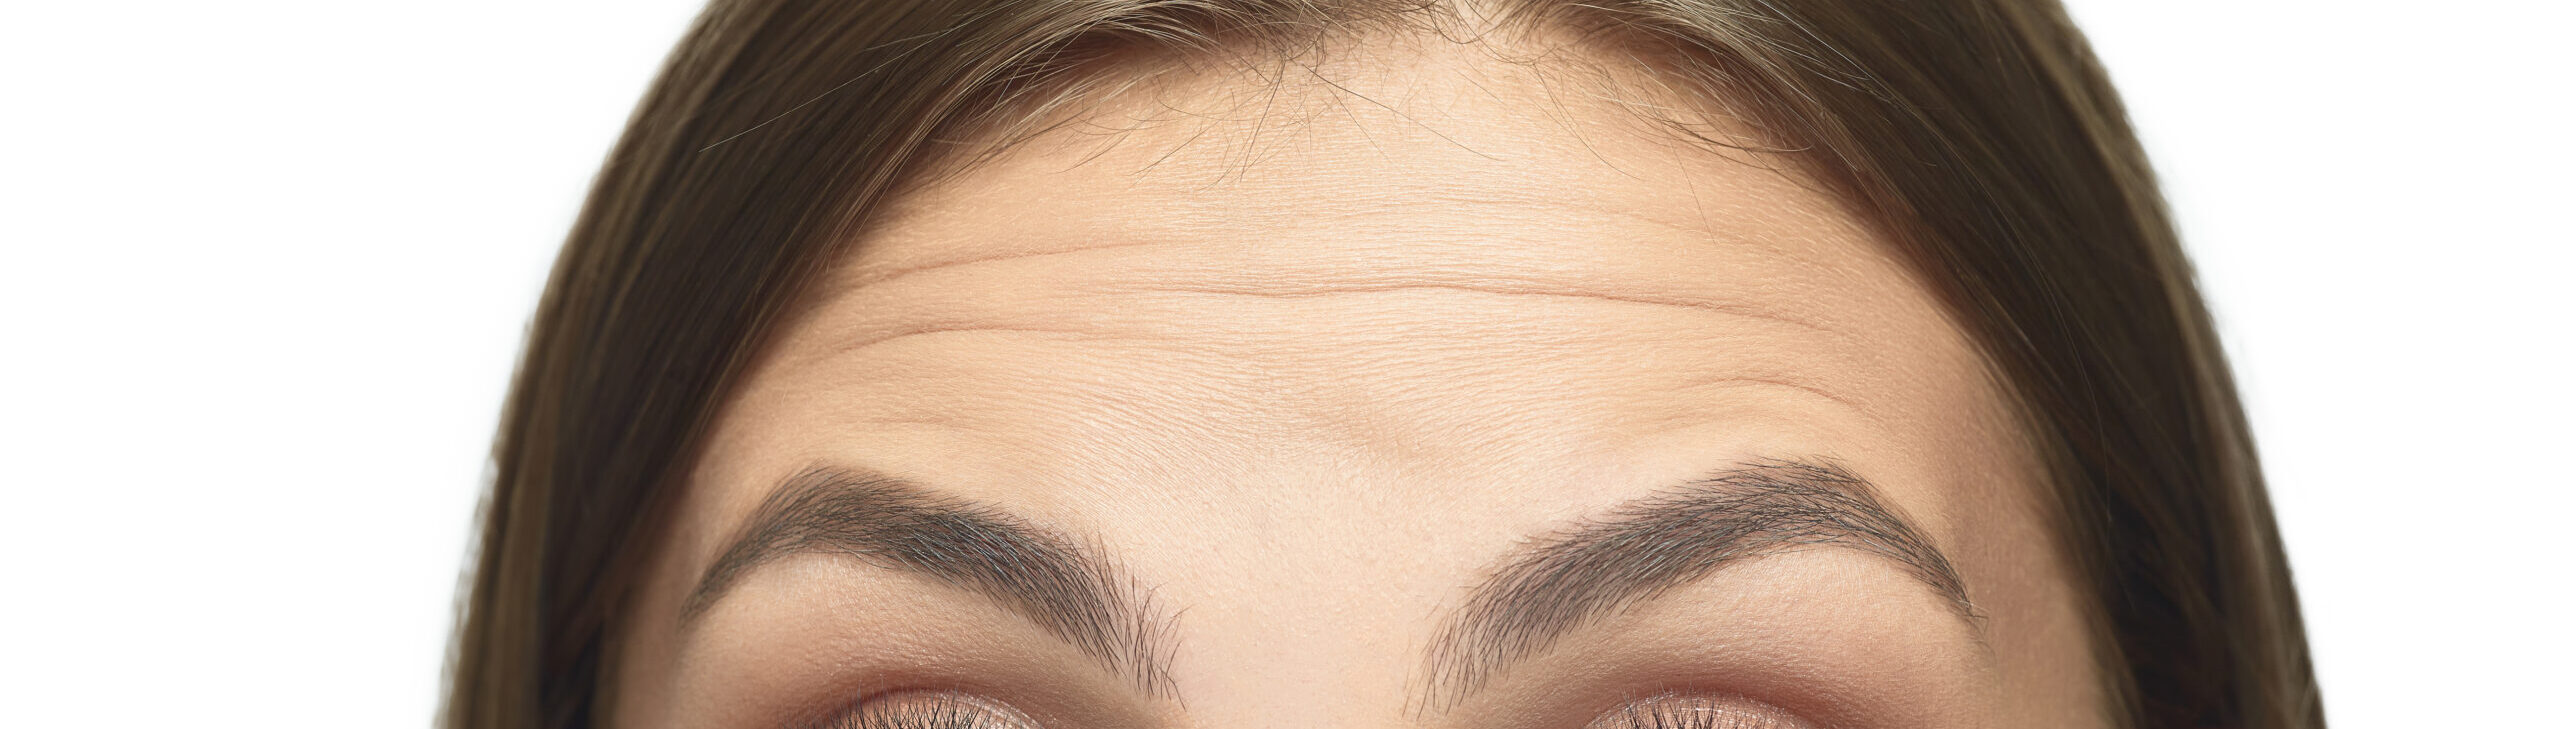  Forehead Lines